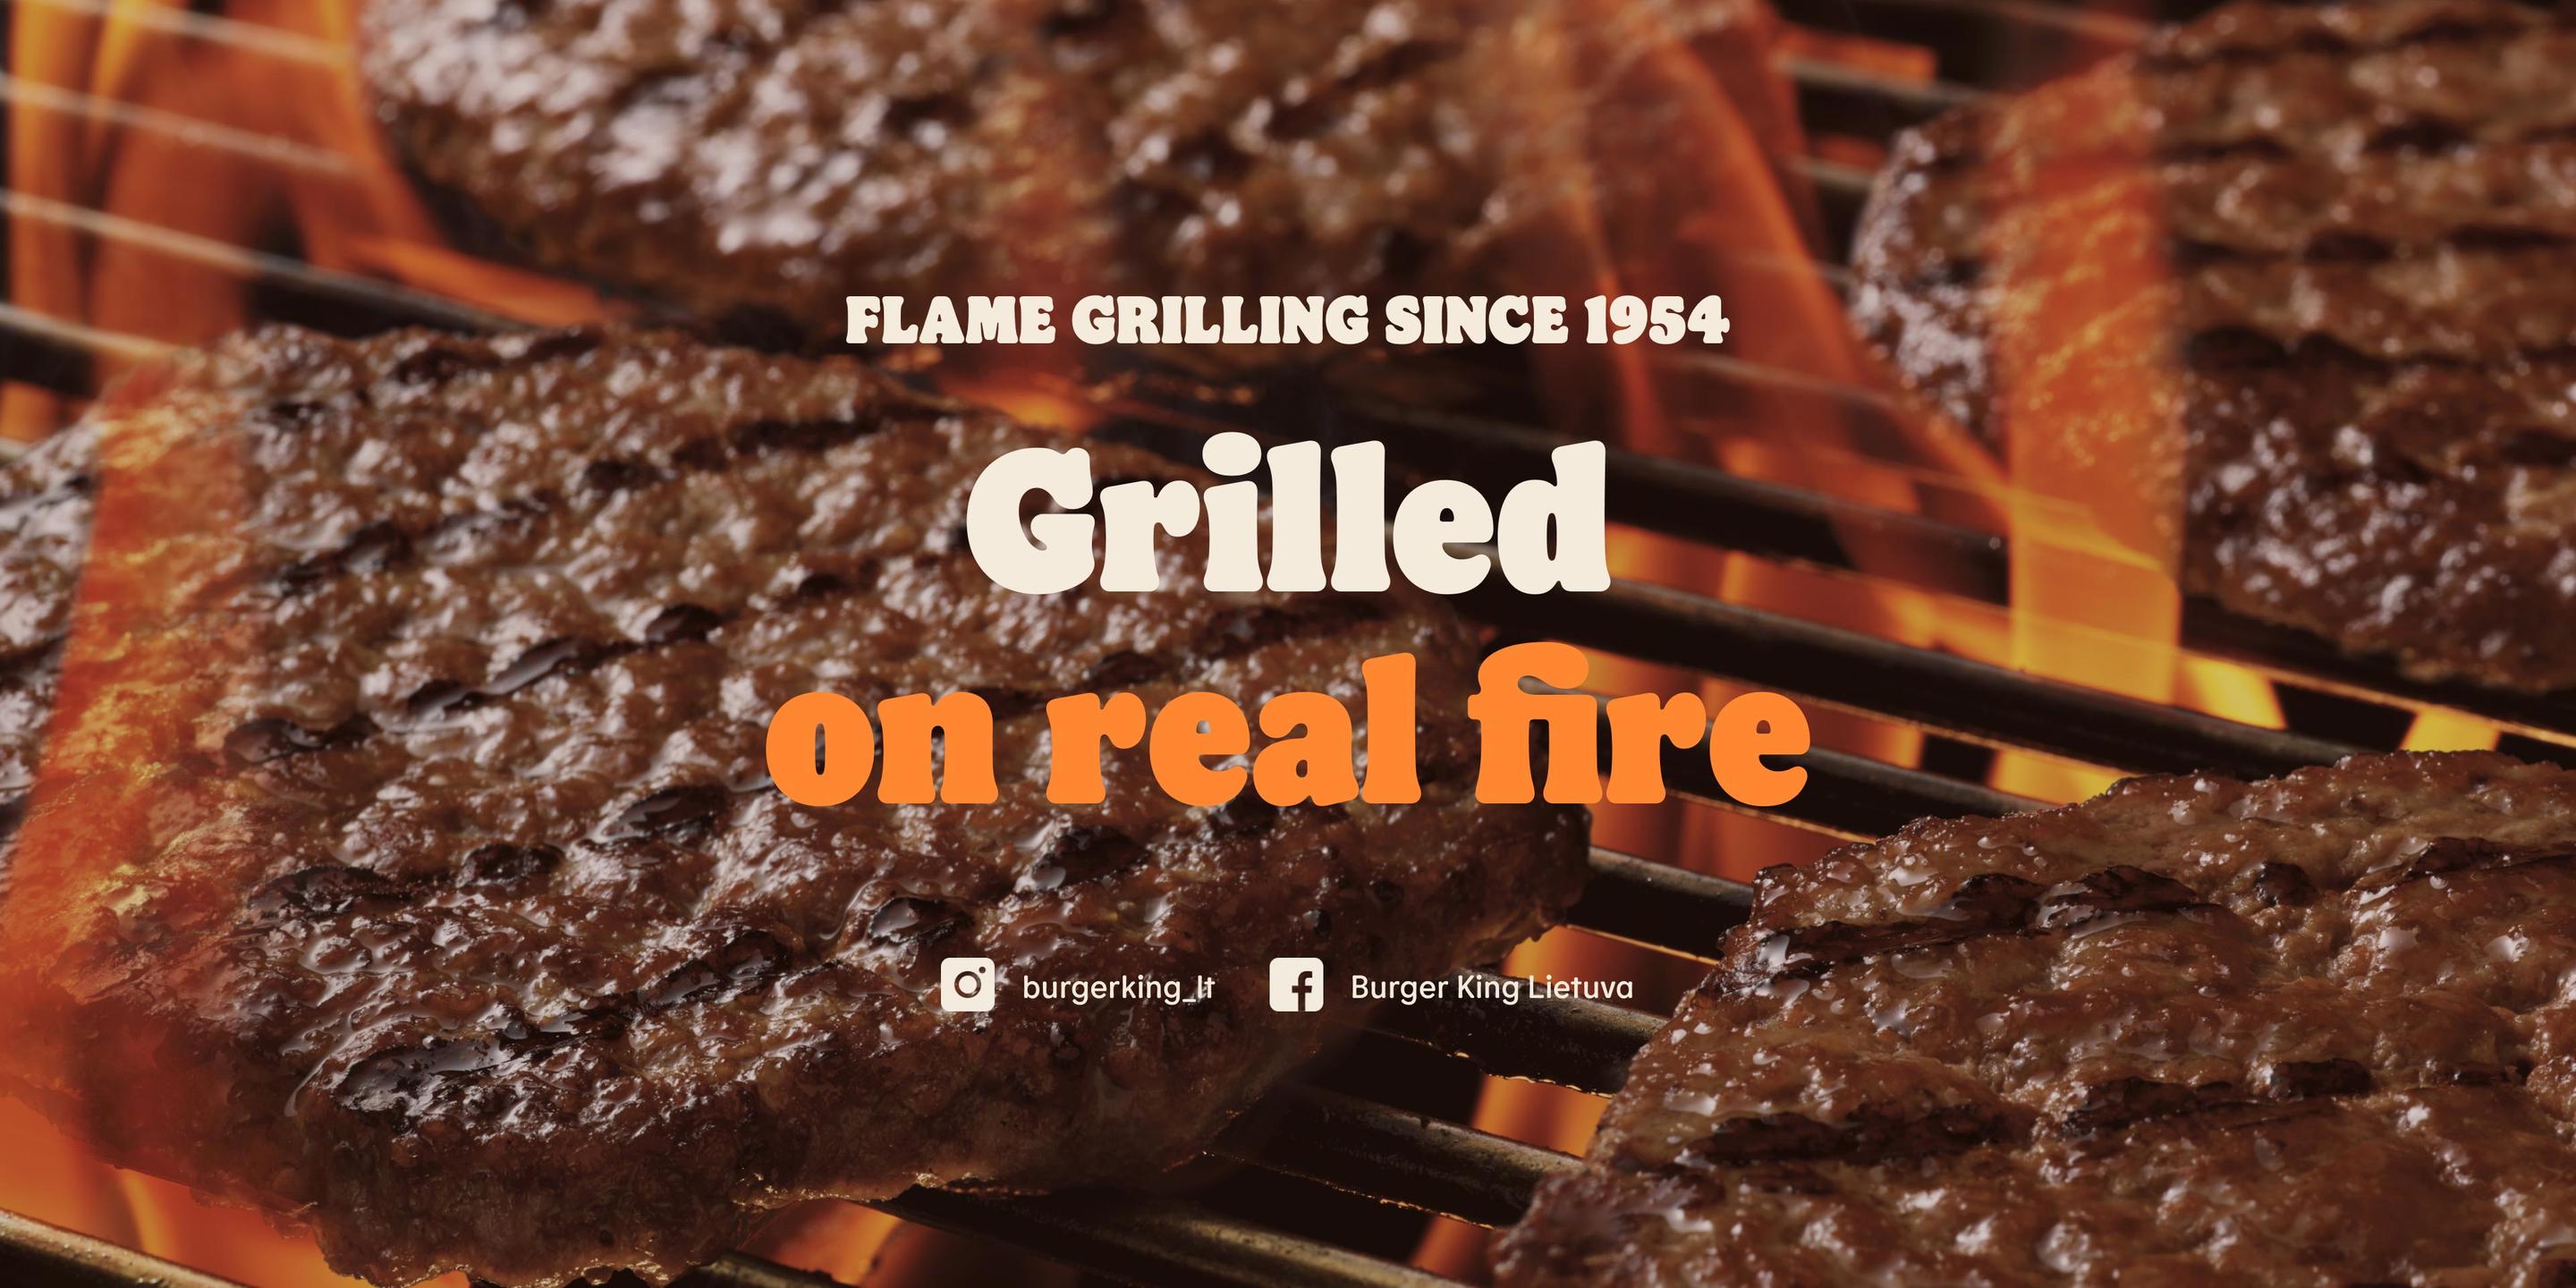 Grilled on real fire